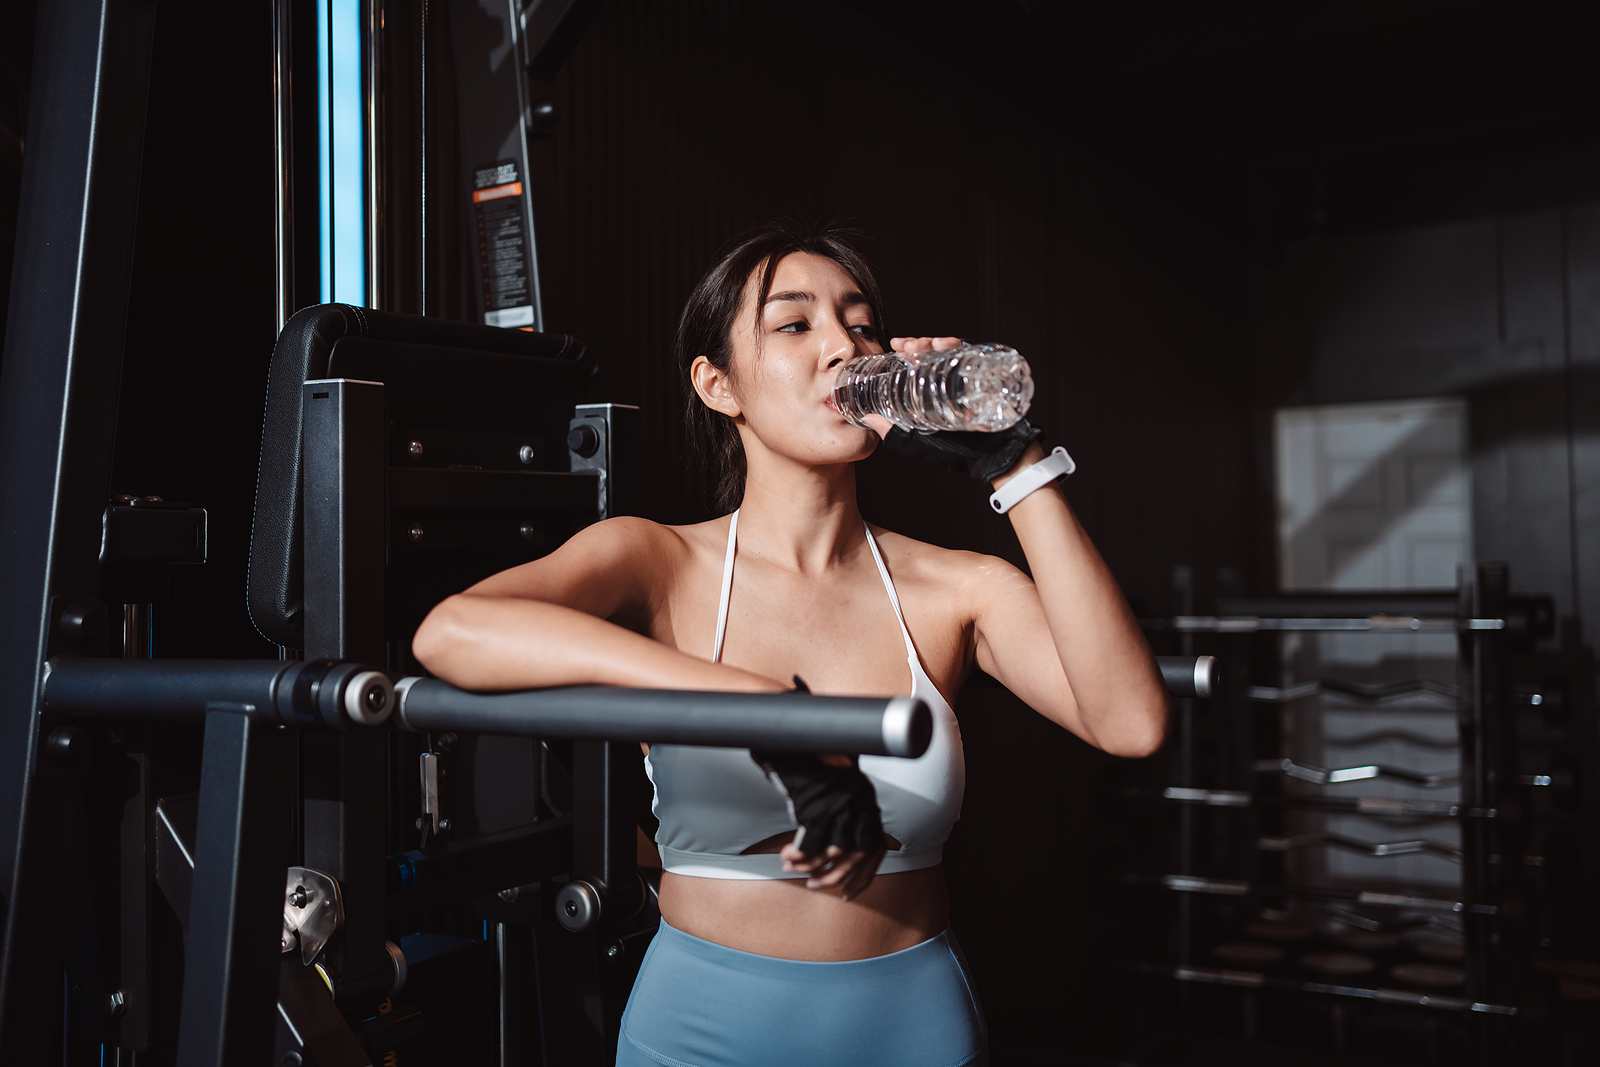 Does Drinking Water Really Help You Get a Six-Pack?